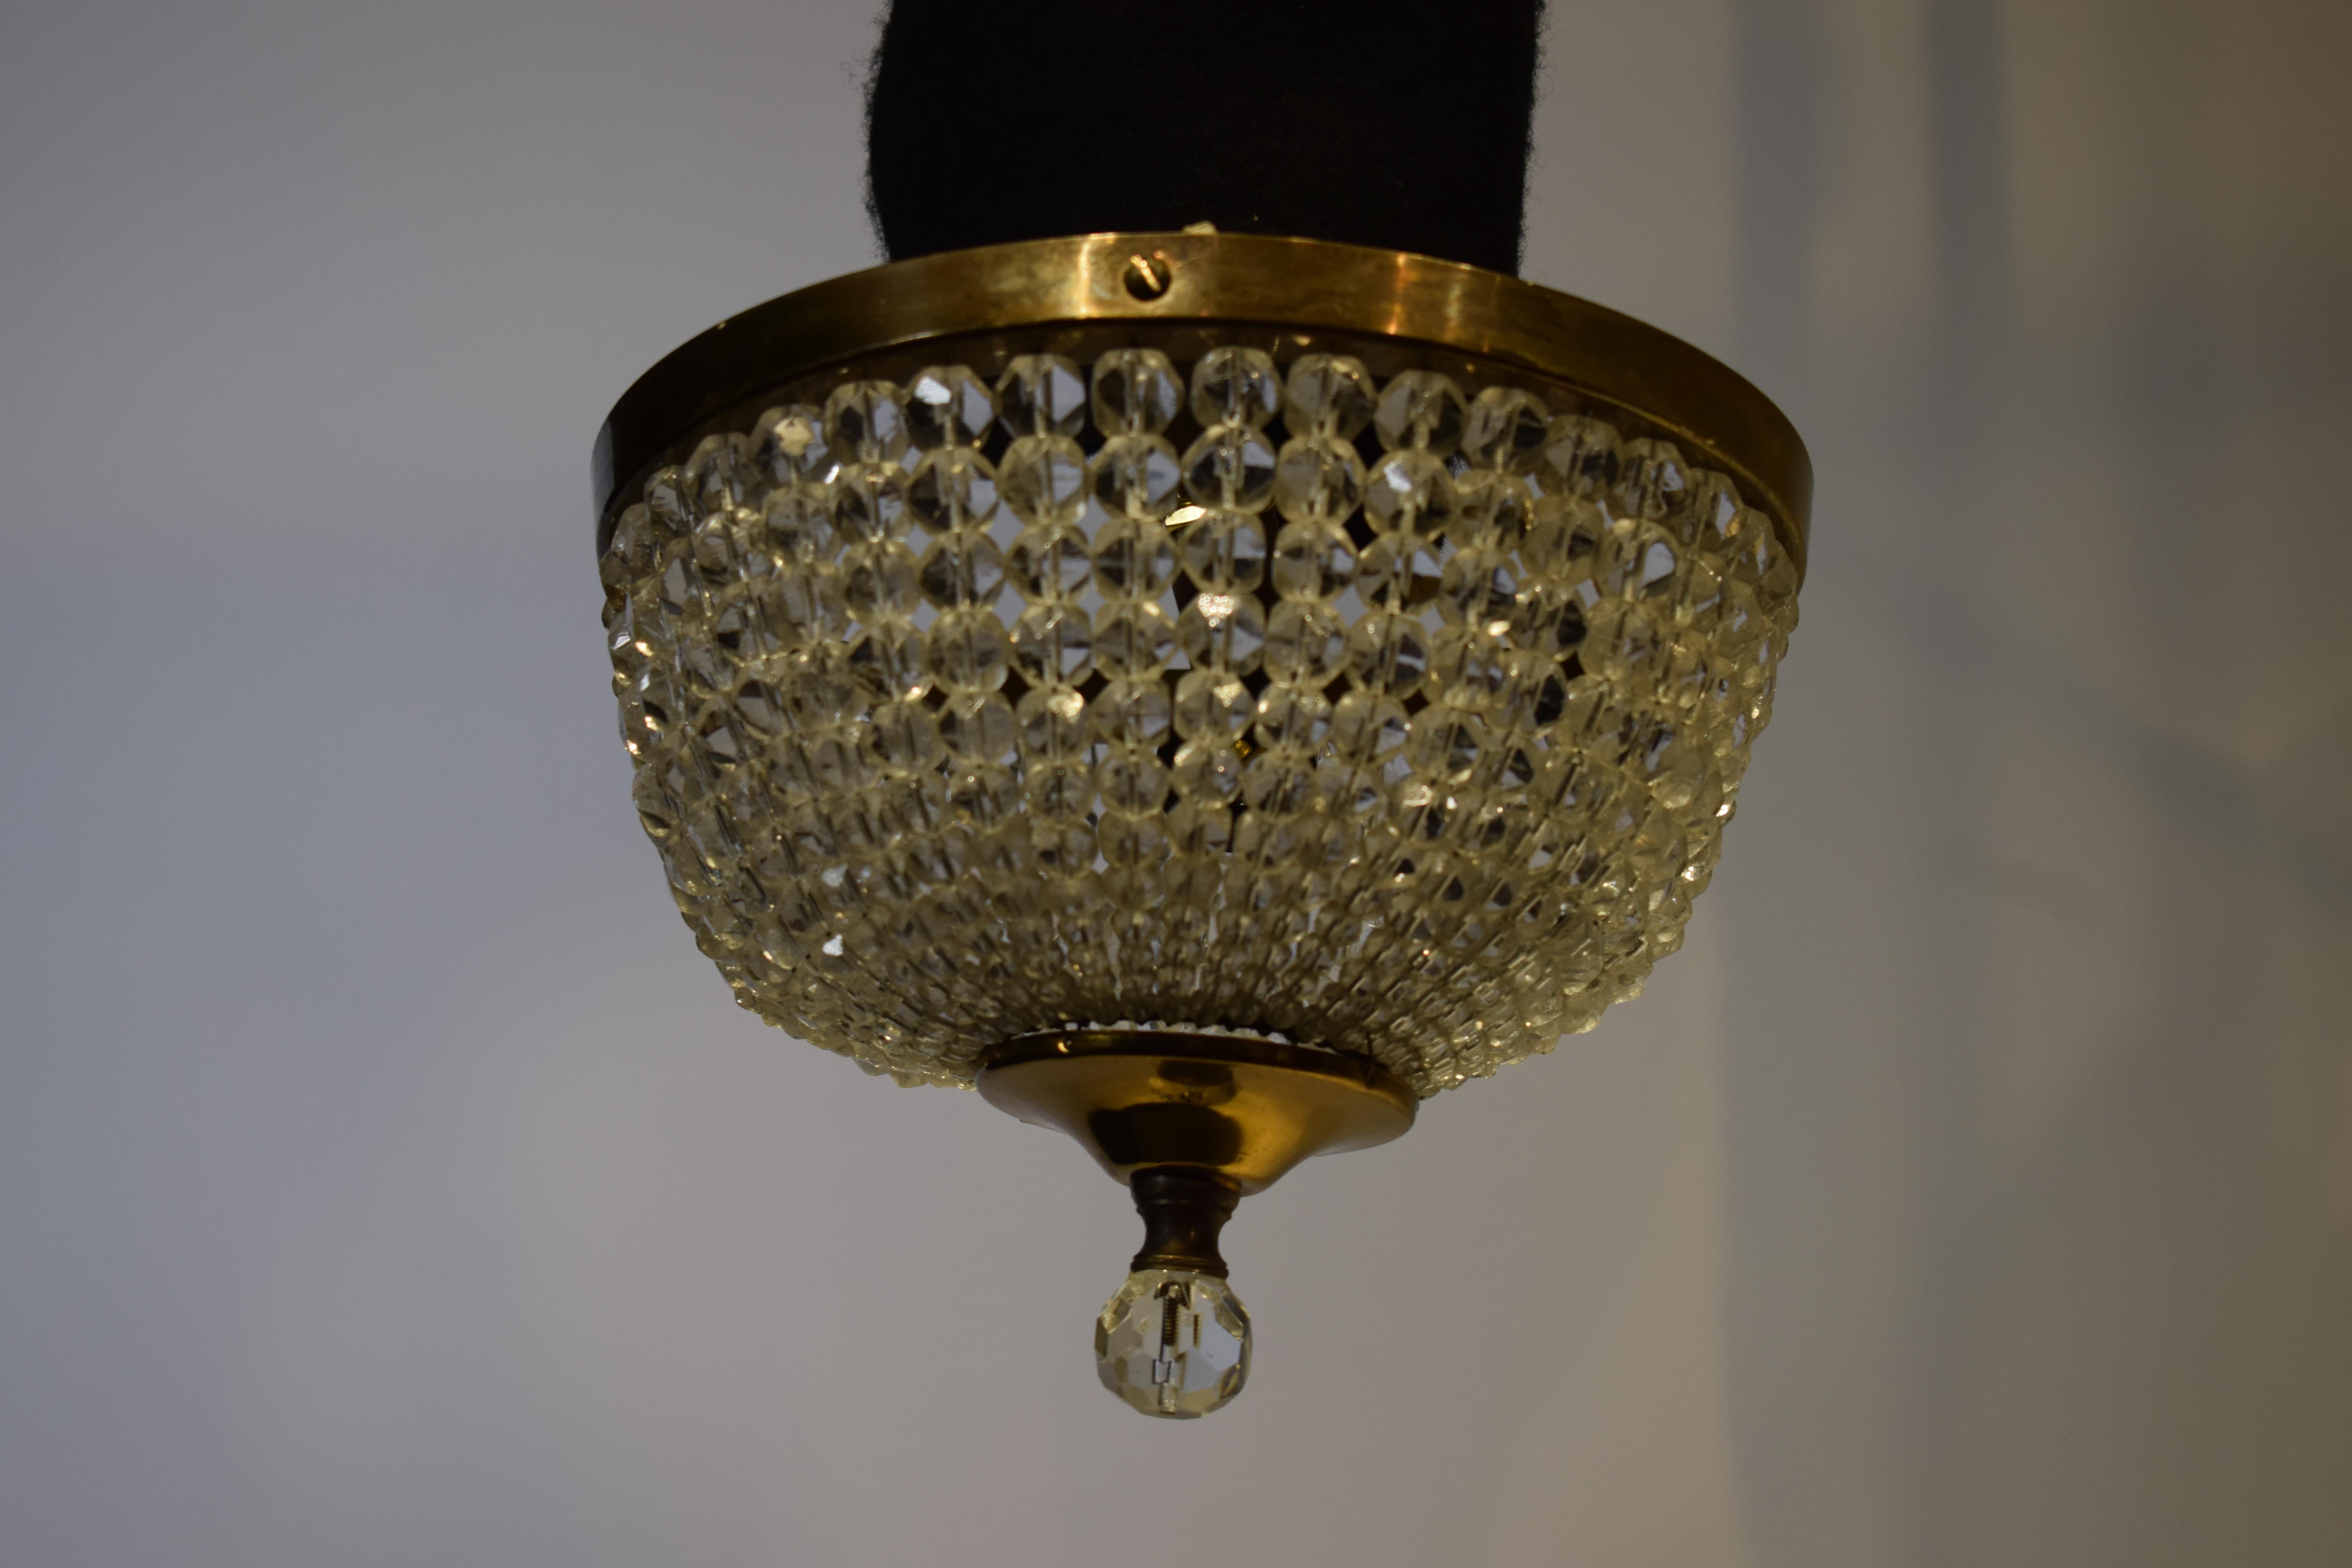 A fine & elegant small bronze & crystal pendant. Bronze ring & bottom plate. Graduated faceted crystal bead chains & bottom finial. France, circa 1920.
Dimensions: height 7 1/4